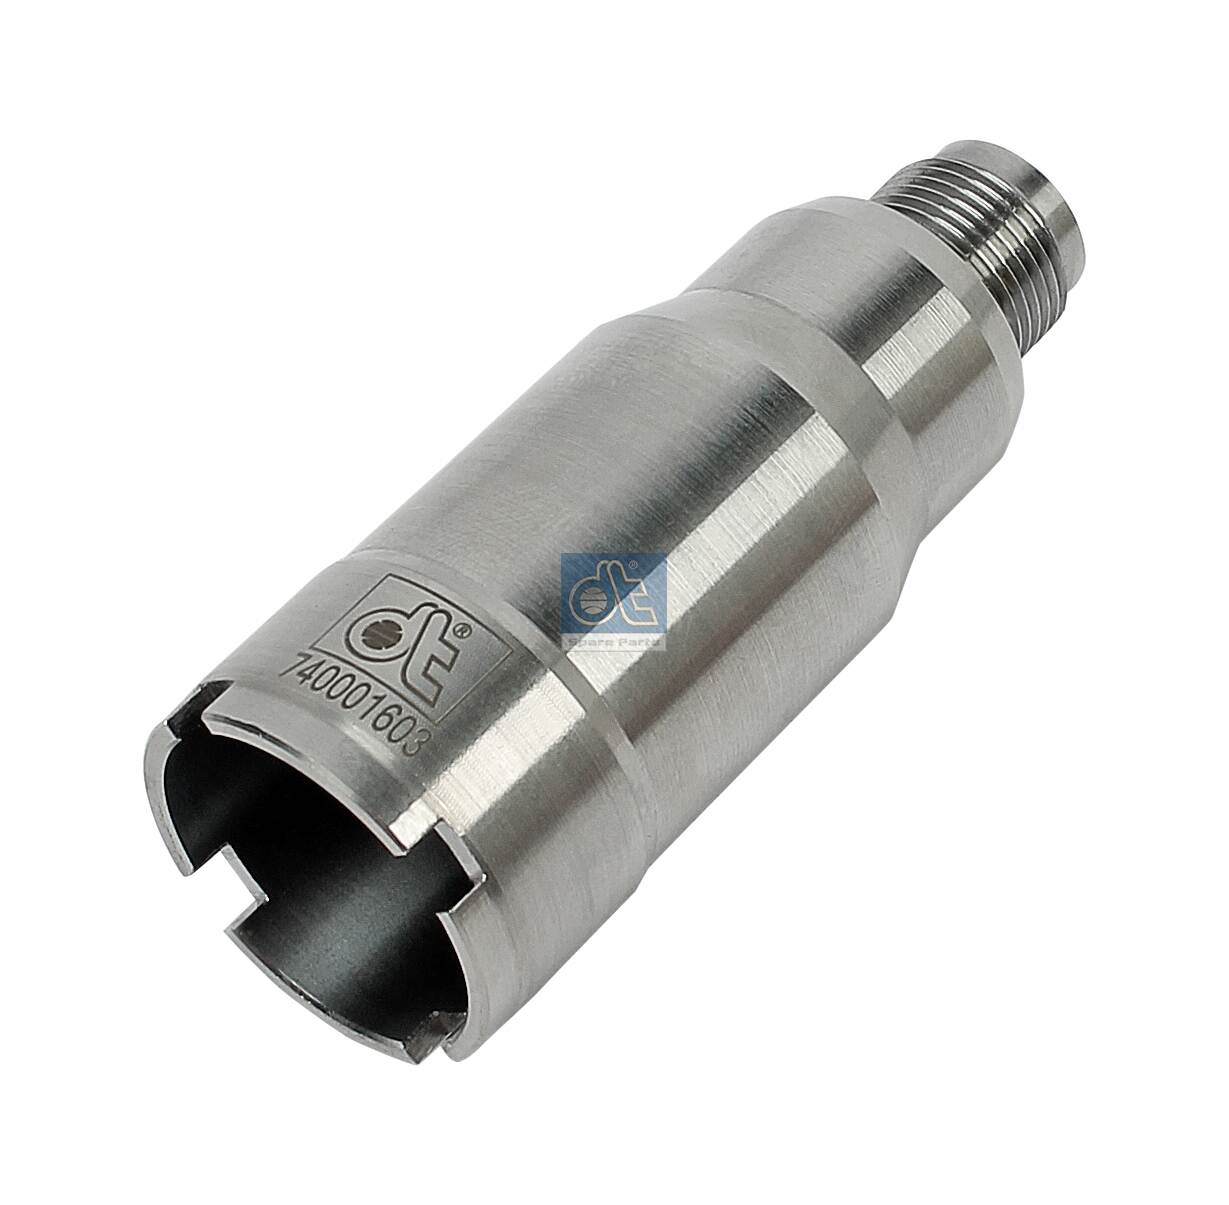 4.40267, Sleeve, nozzle holder, DT Spare Parts, 9060170488, A9060170488, 010124900000, 01.10.128, 171108, 20010390600, 203.470, 80316, 20.0103.90600